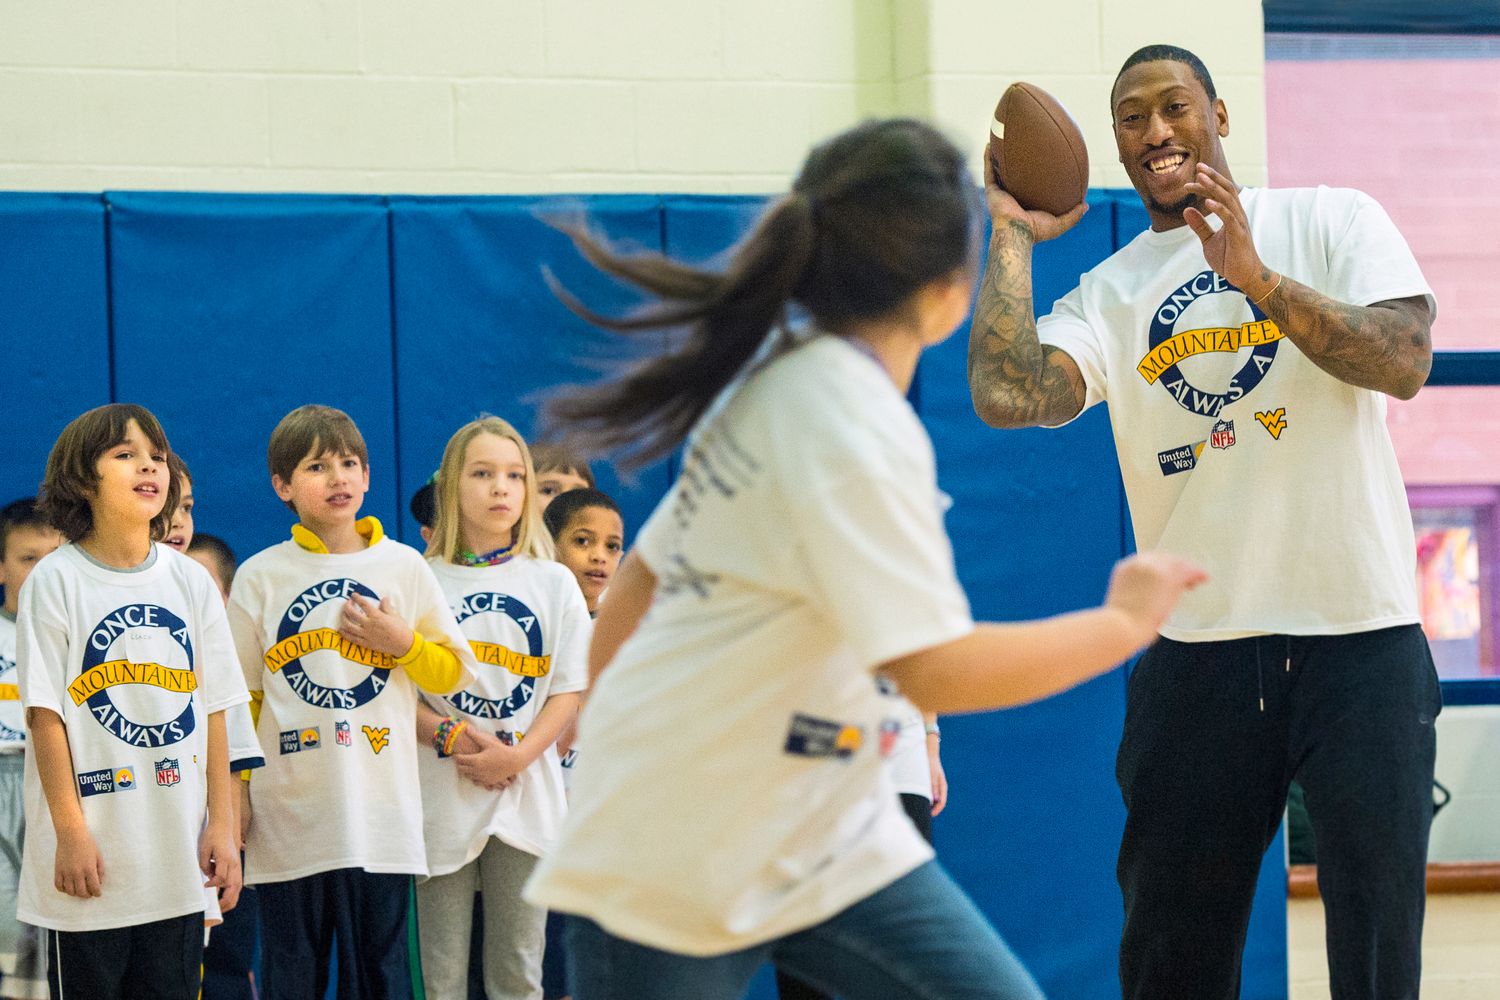 Bruce Irvin plays football with children.